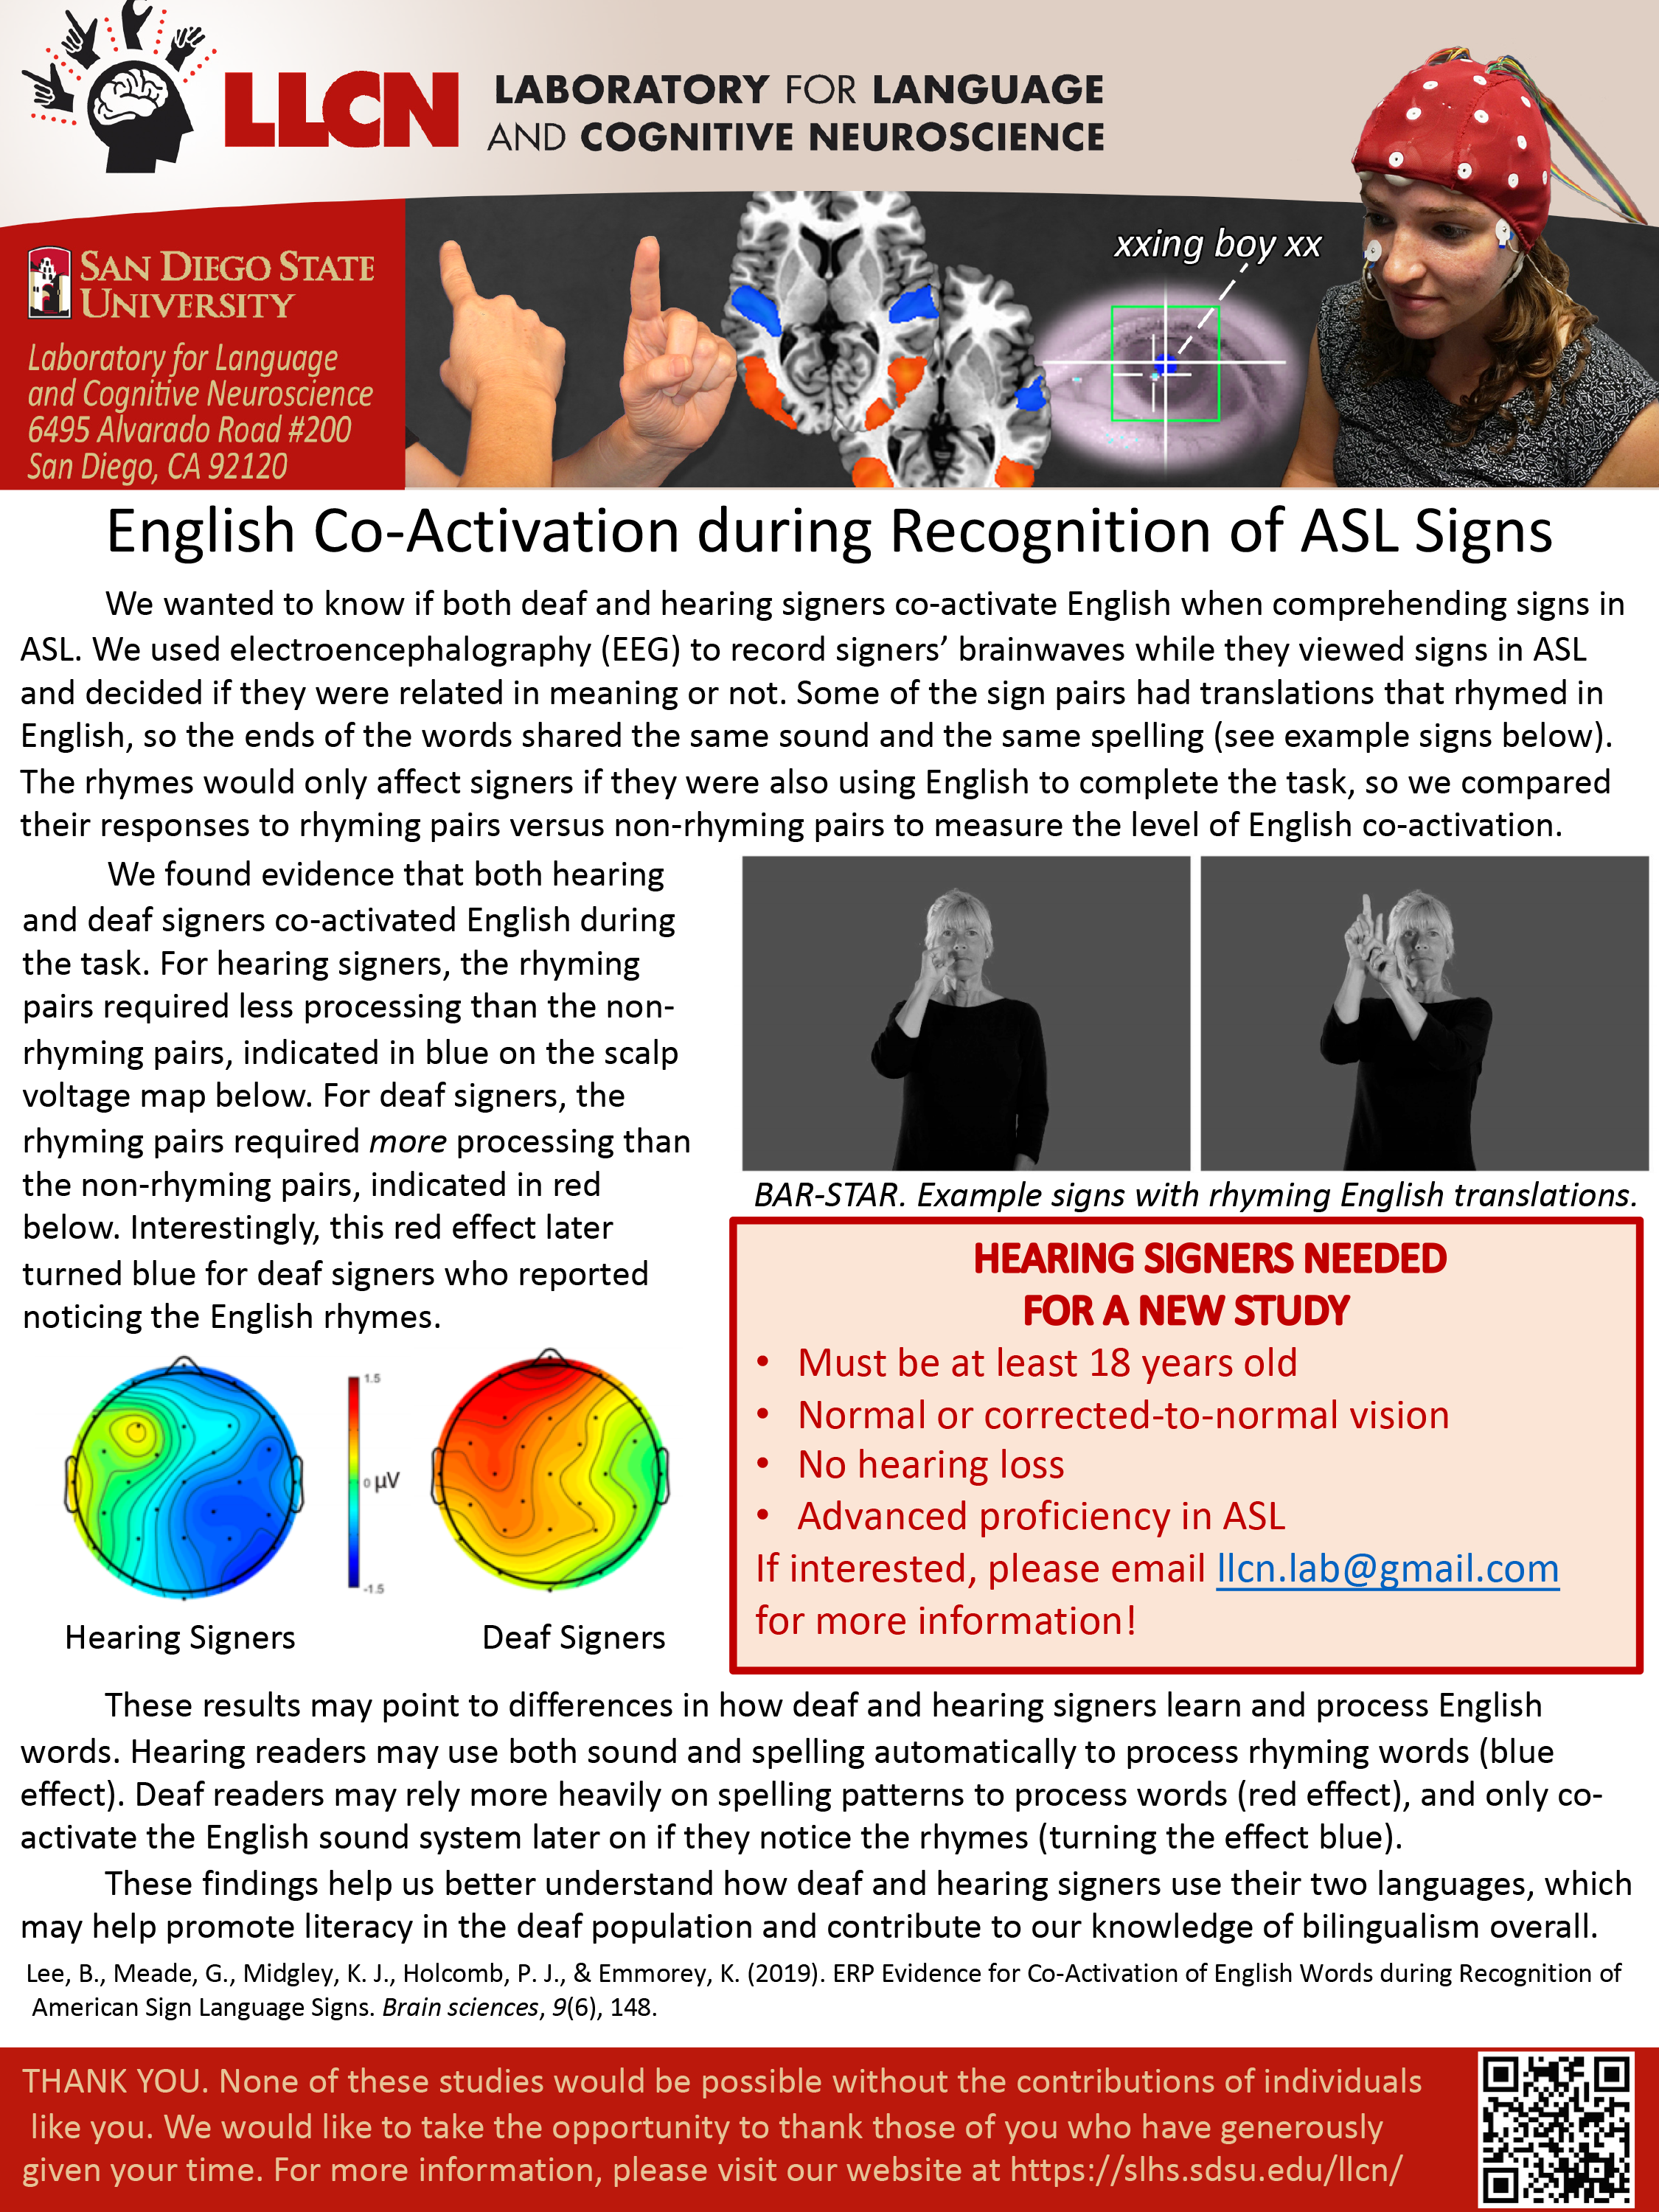 Research shows English co-activation during recognition of ASL signs